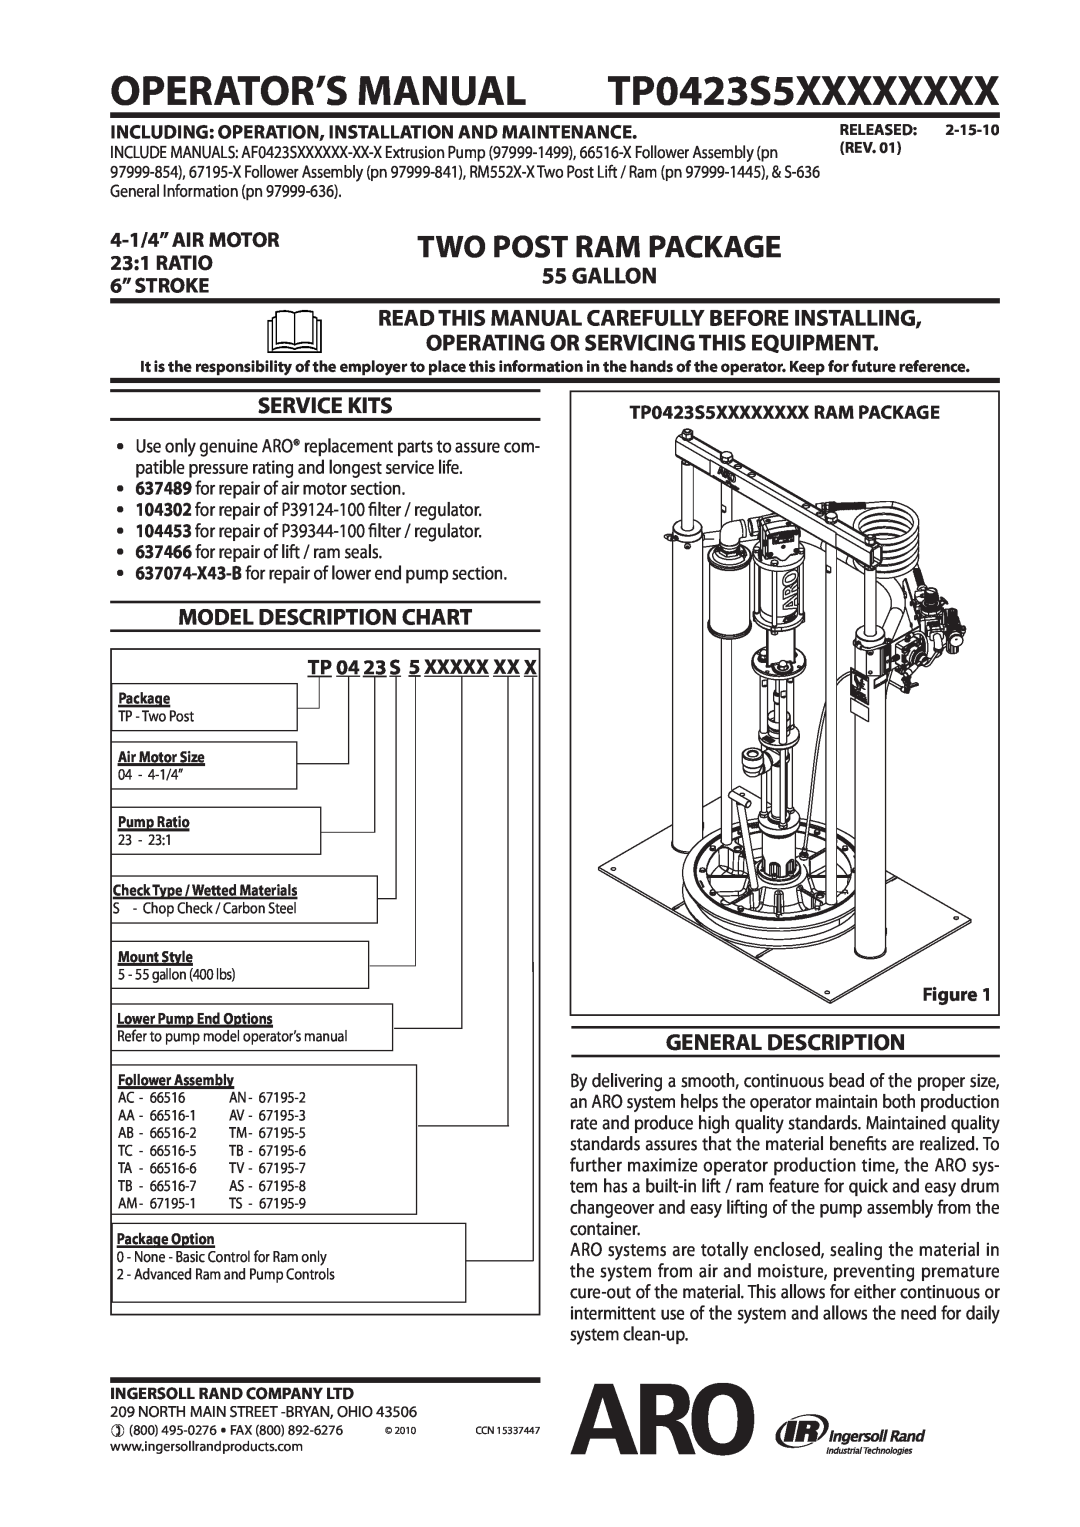 Ingersoll-Rand TP0423S5XXXXXXXX manual Read This Manual Carefully Before Installing, Operating Or Servicing This Equipment 